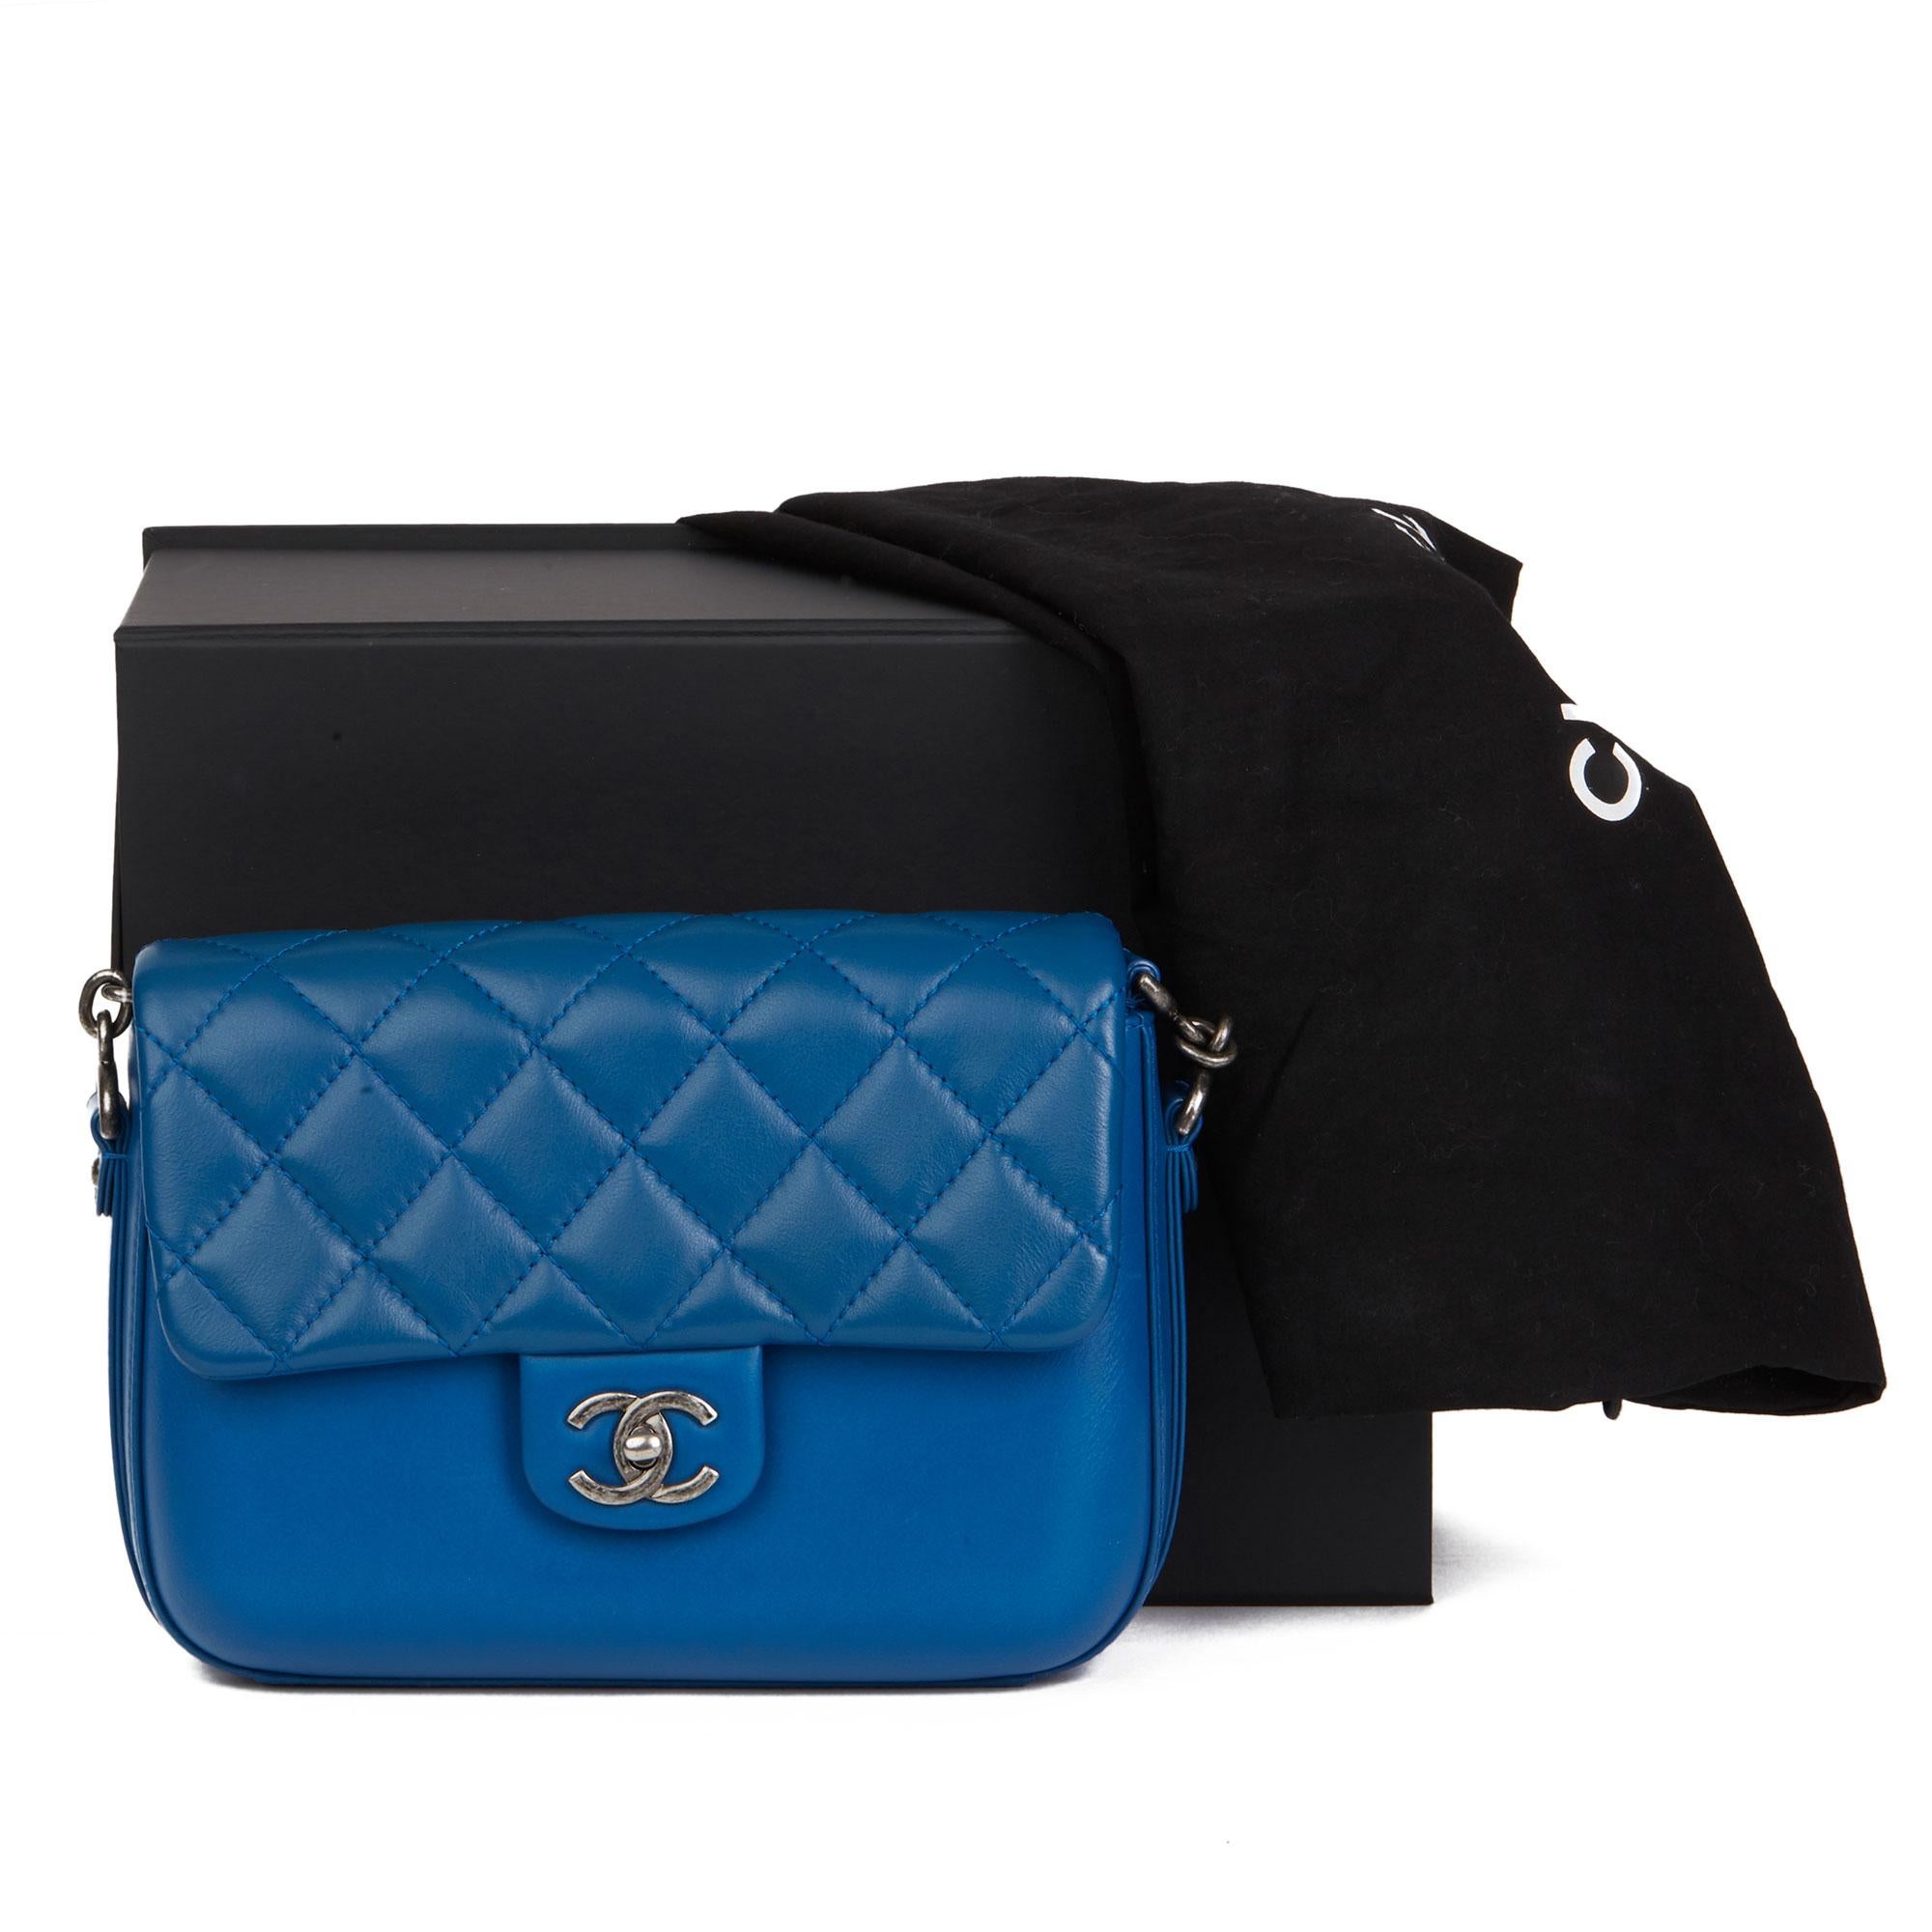 2018 Chanel Blue Quilted Calfskin Leather Classic Single Flap Bag  5